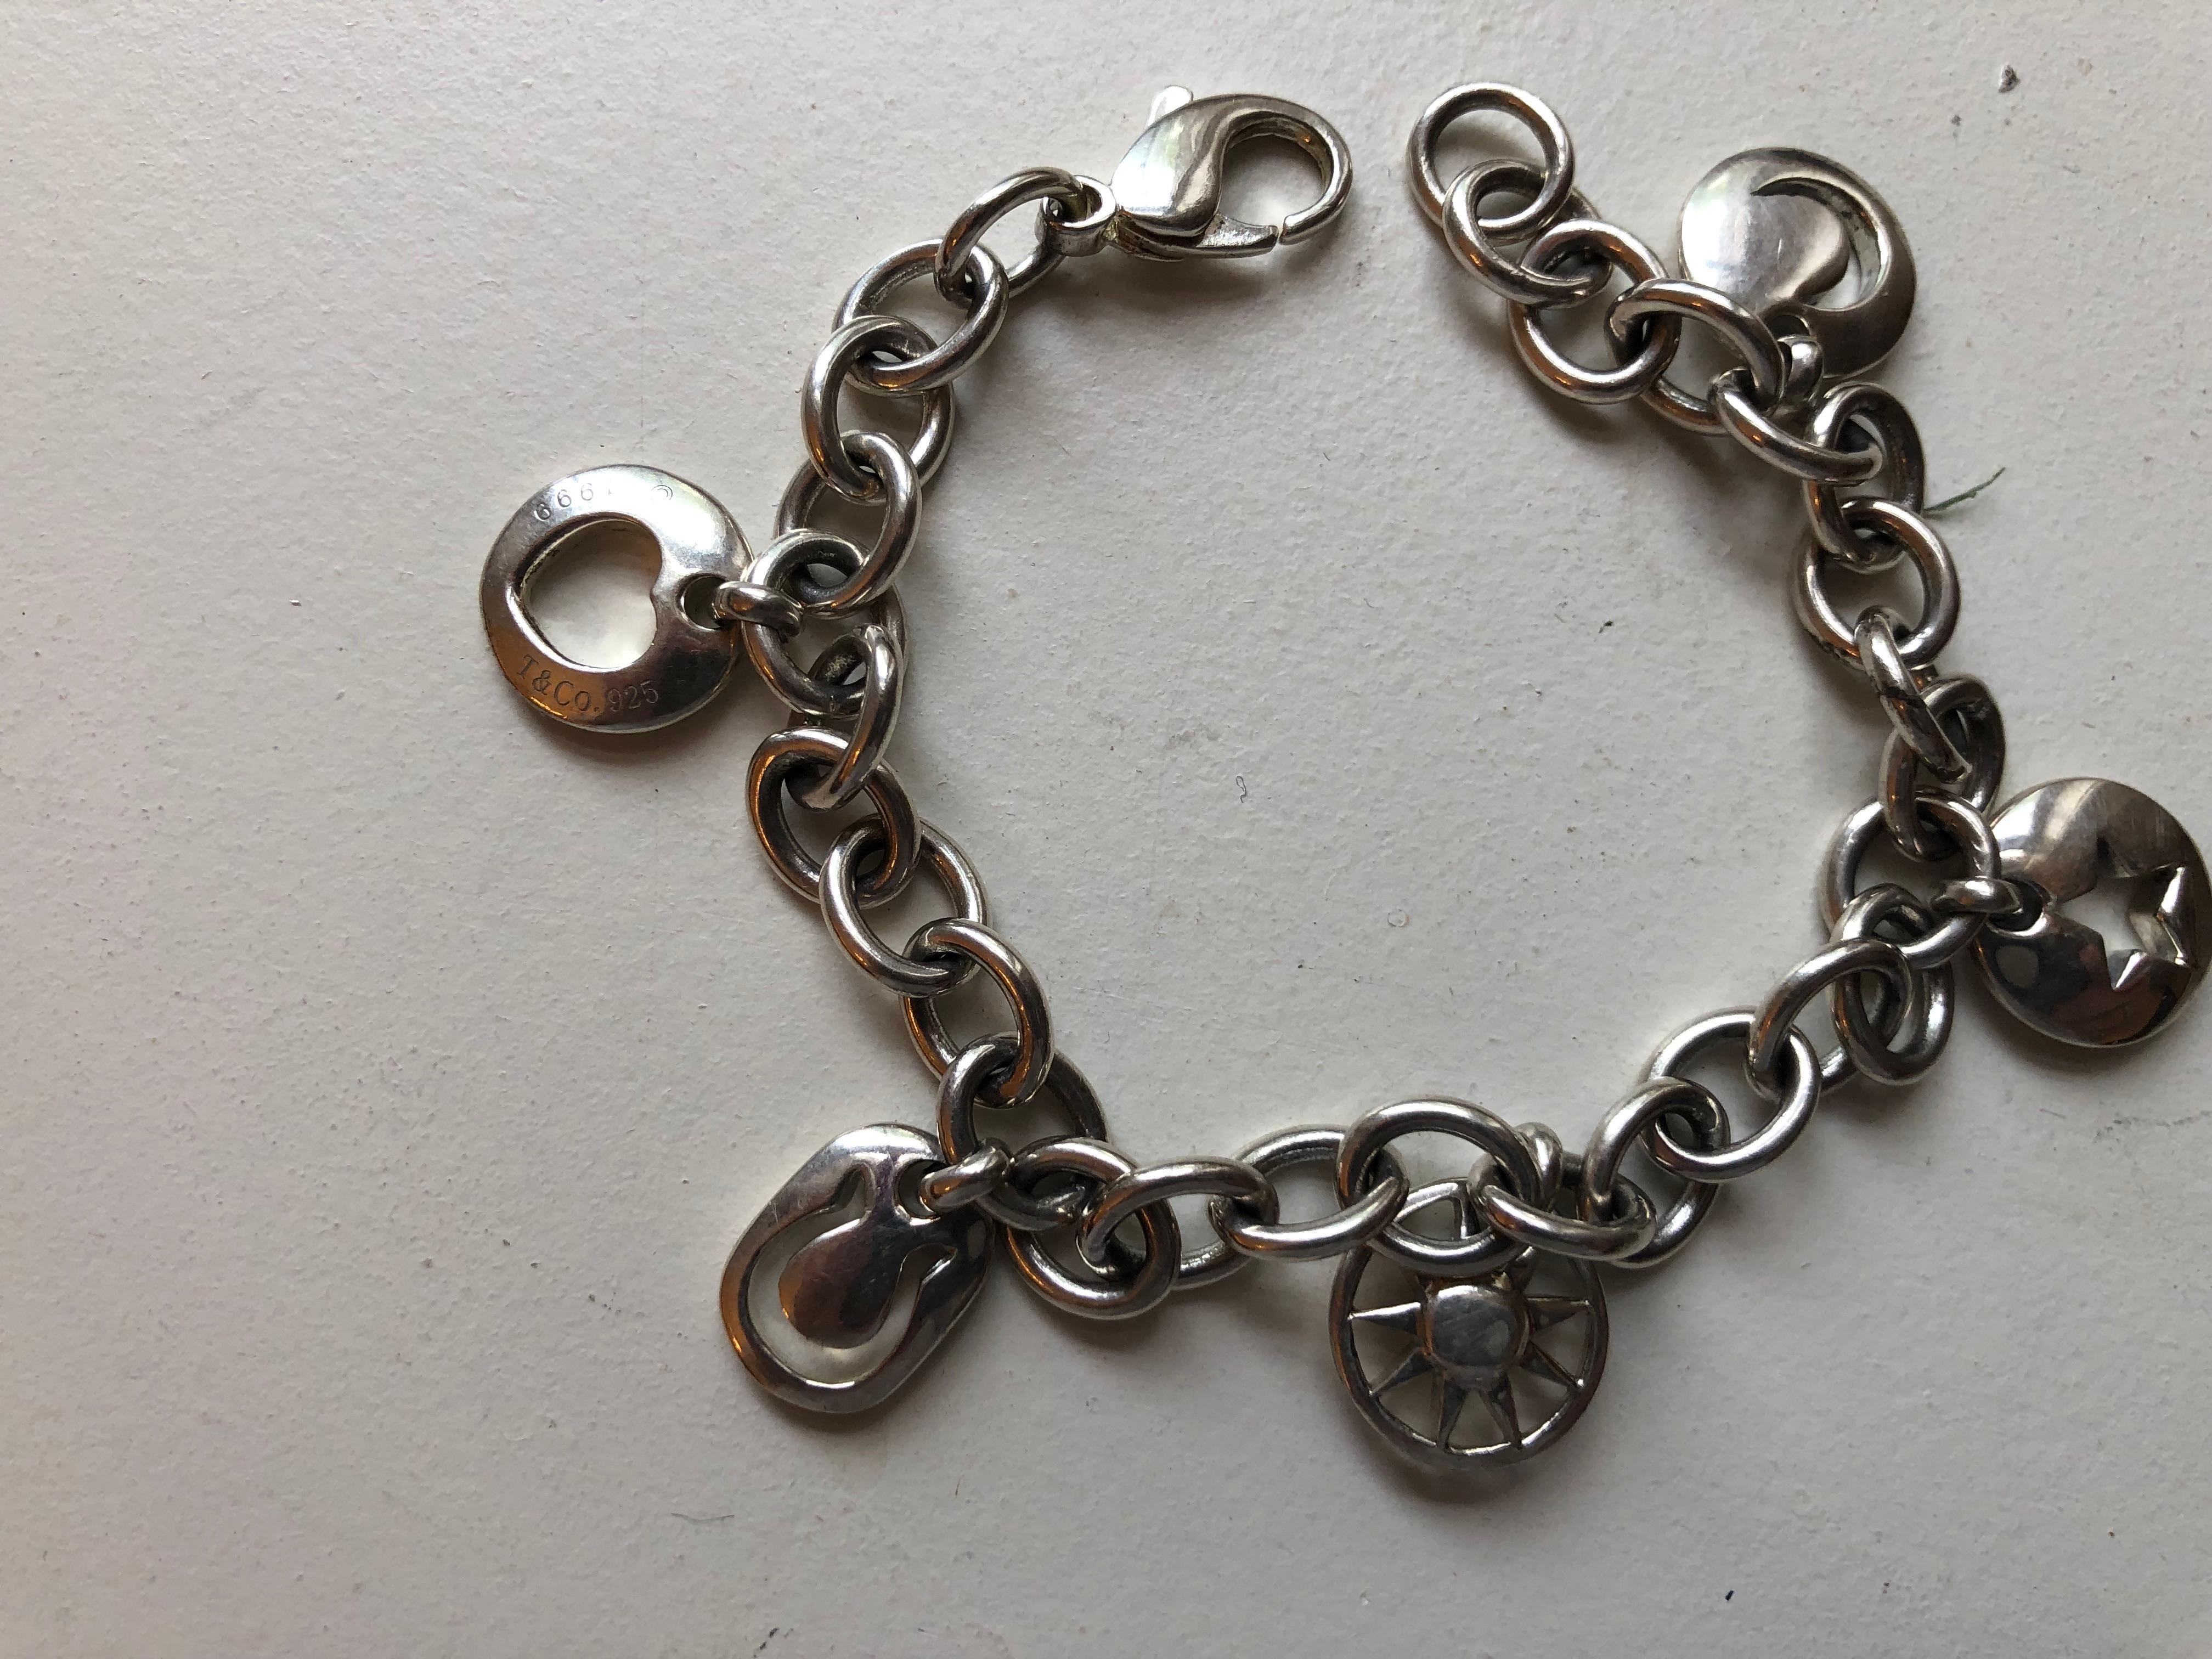 This silver Tiffany charm bracelet has five stencil charm bracelet, and can be worn on a daily basis. The bracelet is very comfortable and in very good condition. The piece is hallmarked, and T & Co along with the silver content 925 is stencilled on